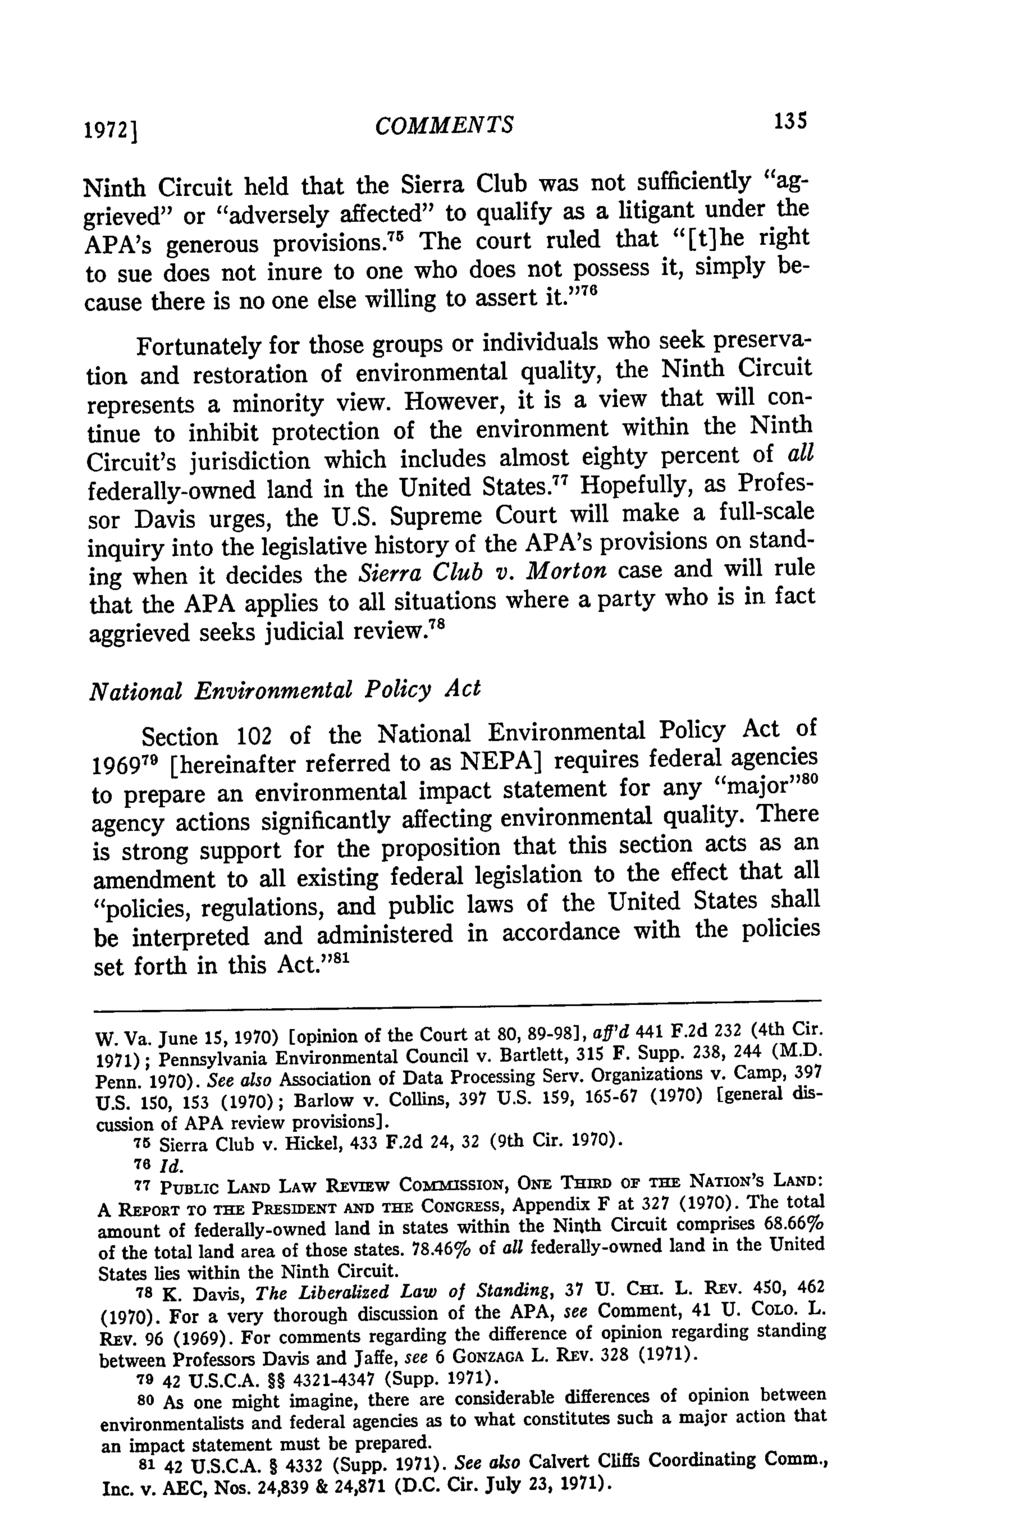 19721 COMMENTS Ninth Circuit held that the Sierra Club was not sufficiently "aggrieved" or "adversely affected" to qualify as a litigant under the APA's generous provisions.